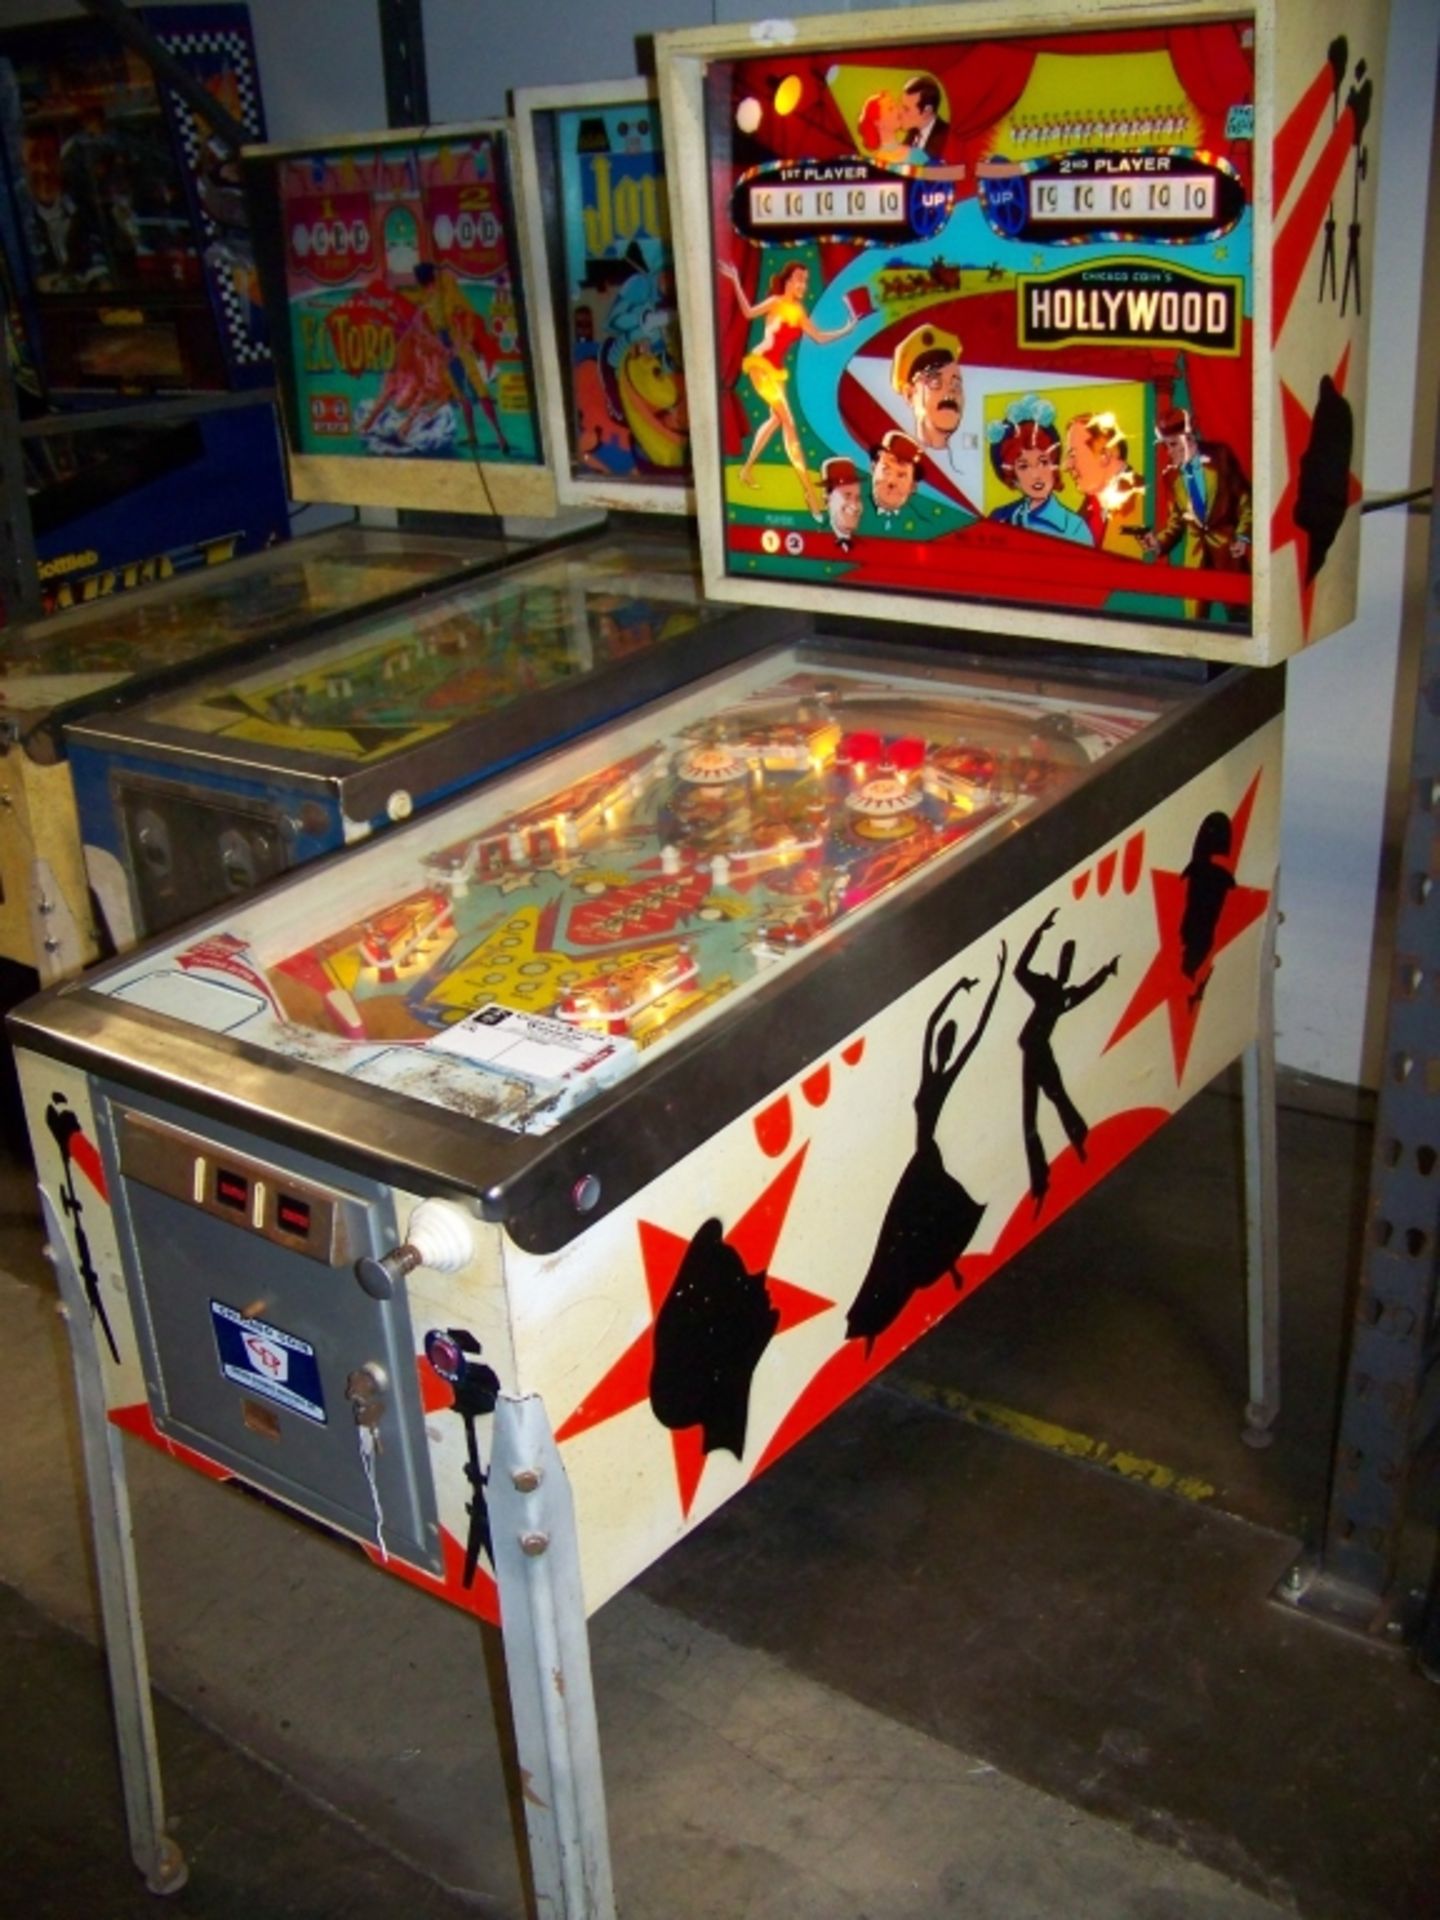 HOLLYWOOD PINBALL MACHINE CHICAGO COIN 1976 Item is in used condition. Evidence of wear and - Image 2 of 6